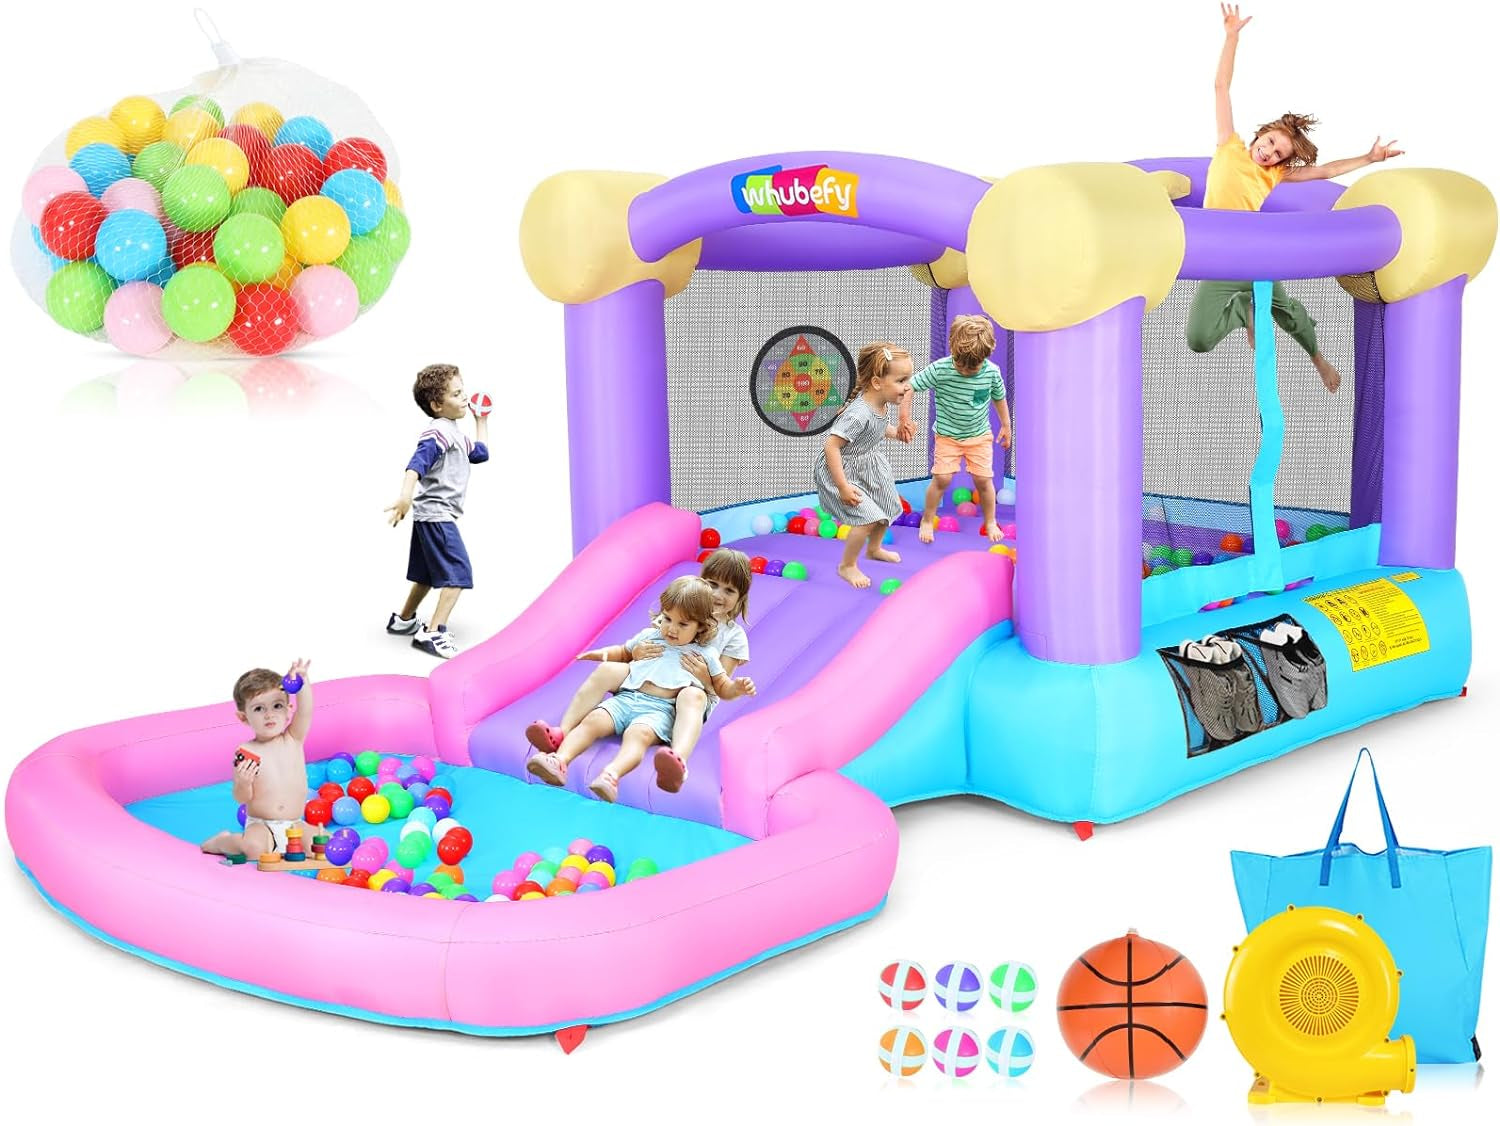 Inflatable Water Slides for Kids 8-In-1 Bounce House Water Park with 450W Blower Climbing Wall, Splash Pool, 2 Water Cannons, Basketball Hoop, Water Slide, Crocodile Sprinkler for Gift Backyard Party